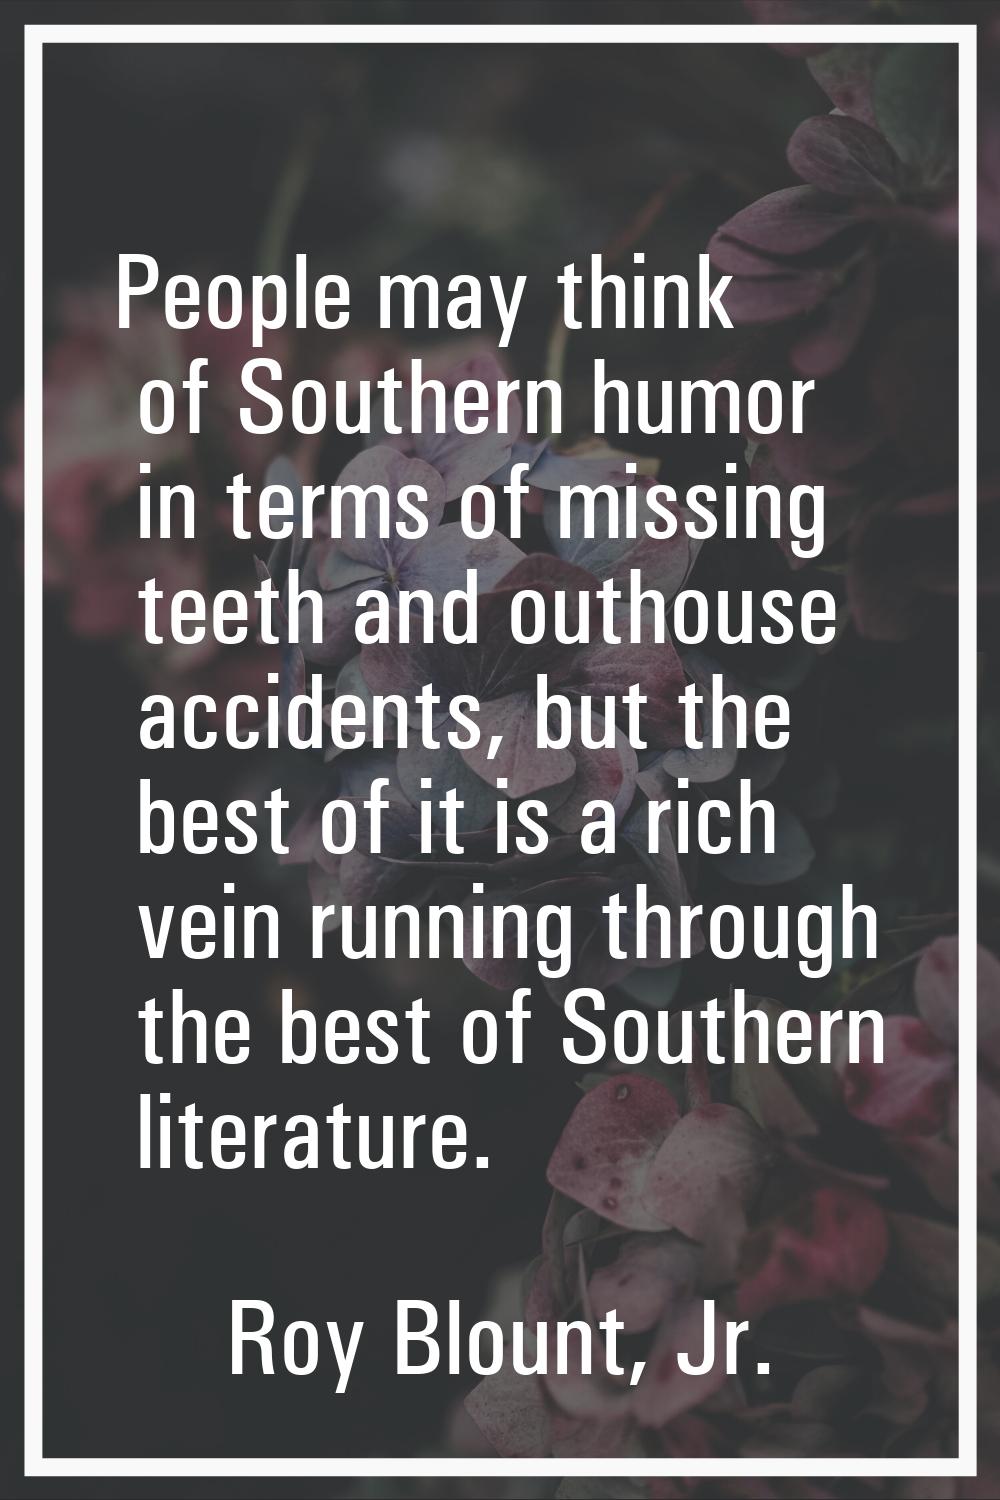 People may think of Southern humor in terms of missing teeth and outhouse accidents, but the best o